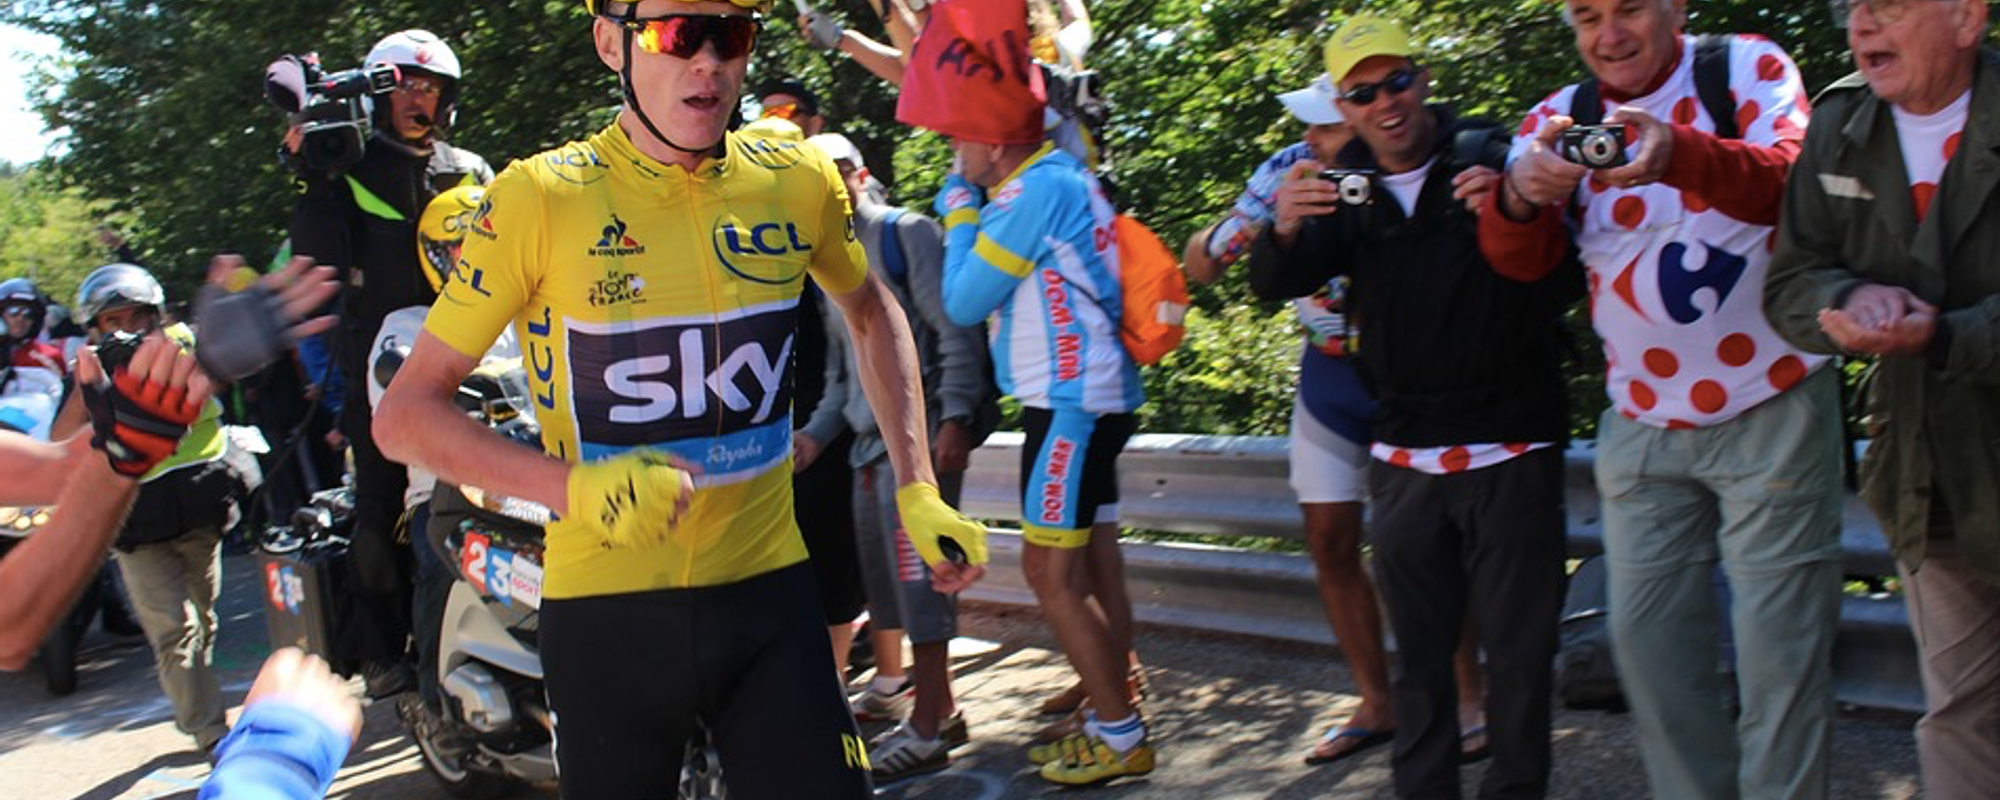 The Idiot’s guide to the Tour de France (….it’s a cycling race…)